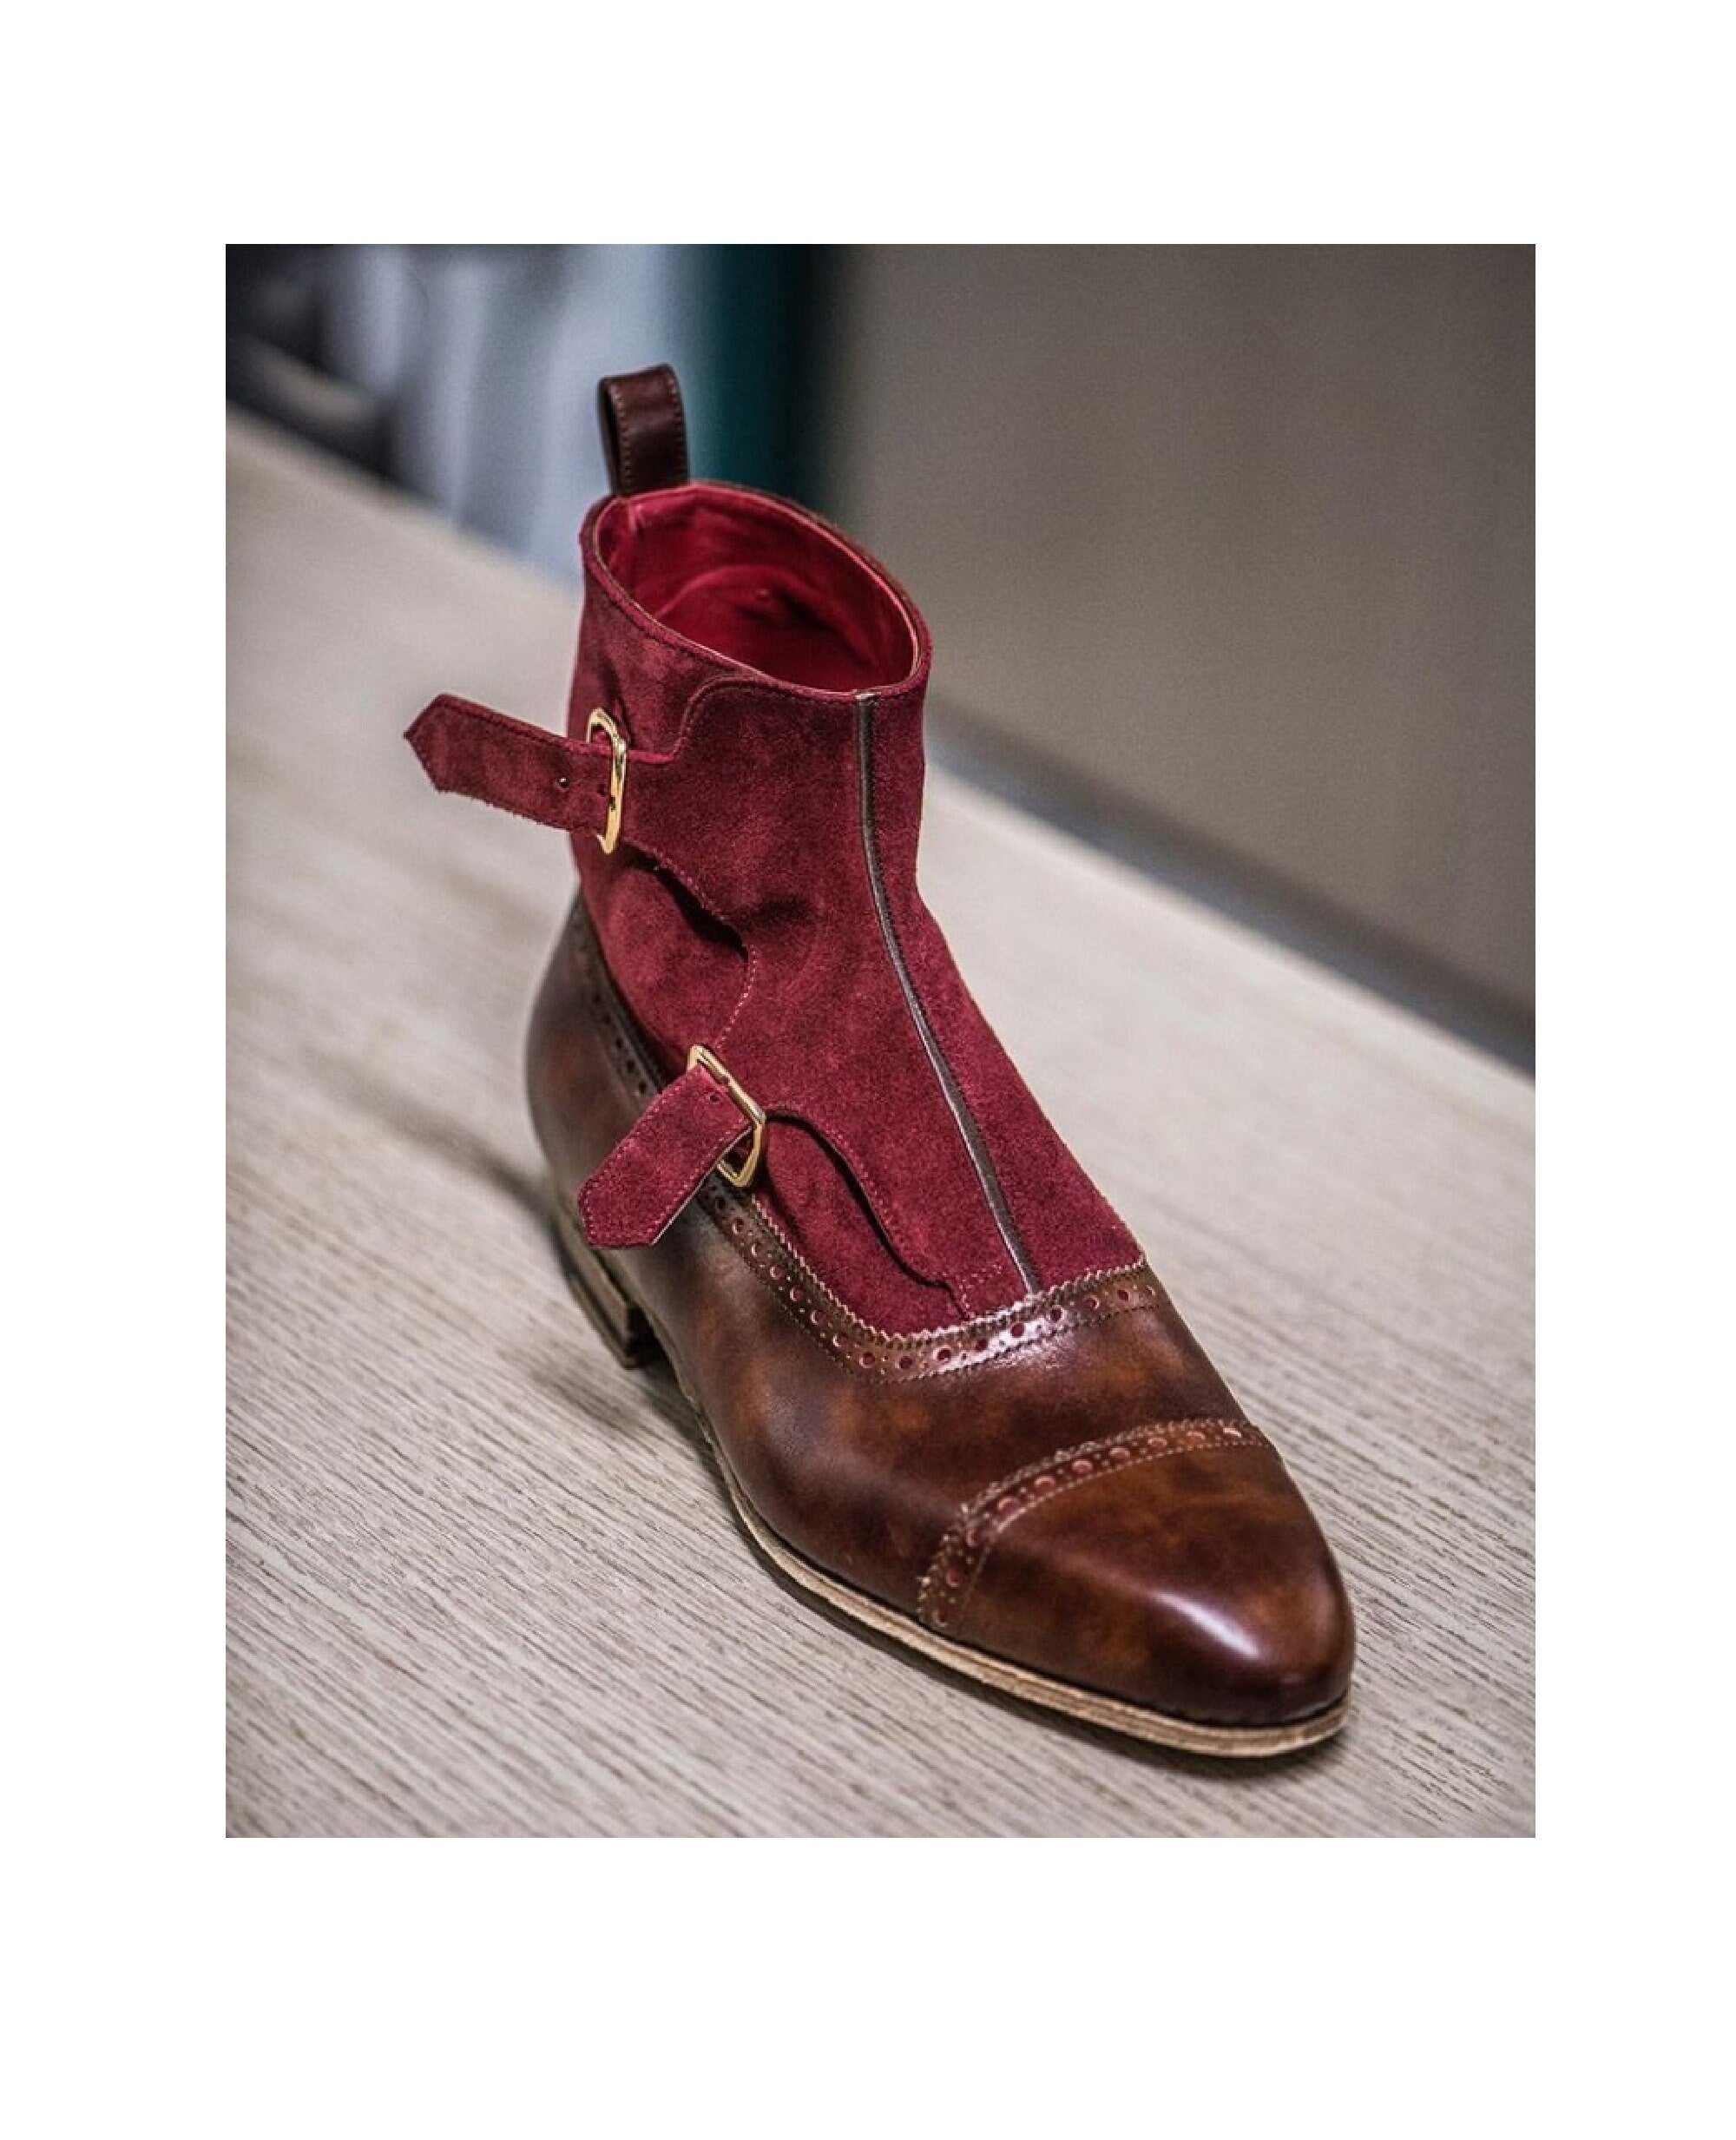 Handmade Bespoke Men's Brown & Red Suede Leather Upper Double Monk Strap , Cap Toe Ankle High Boots, Men boots